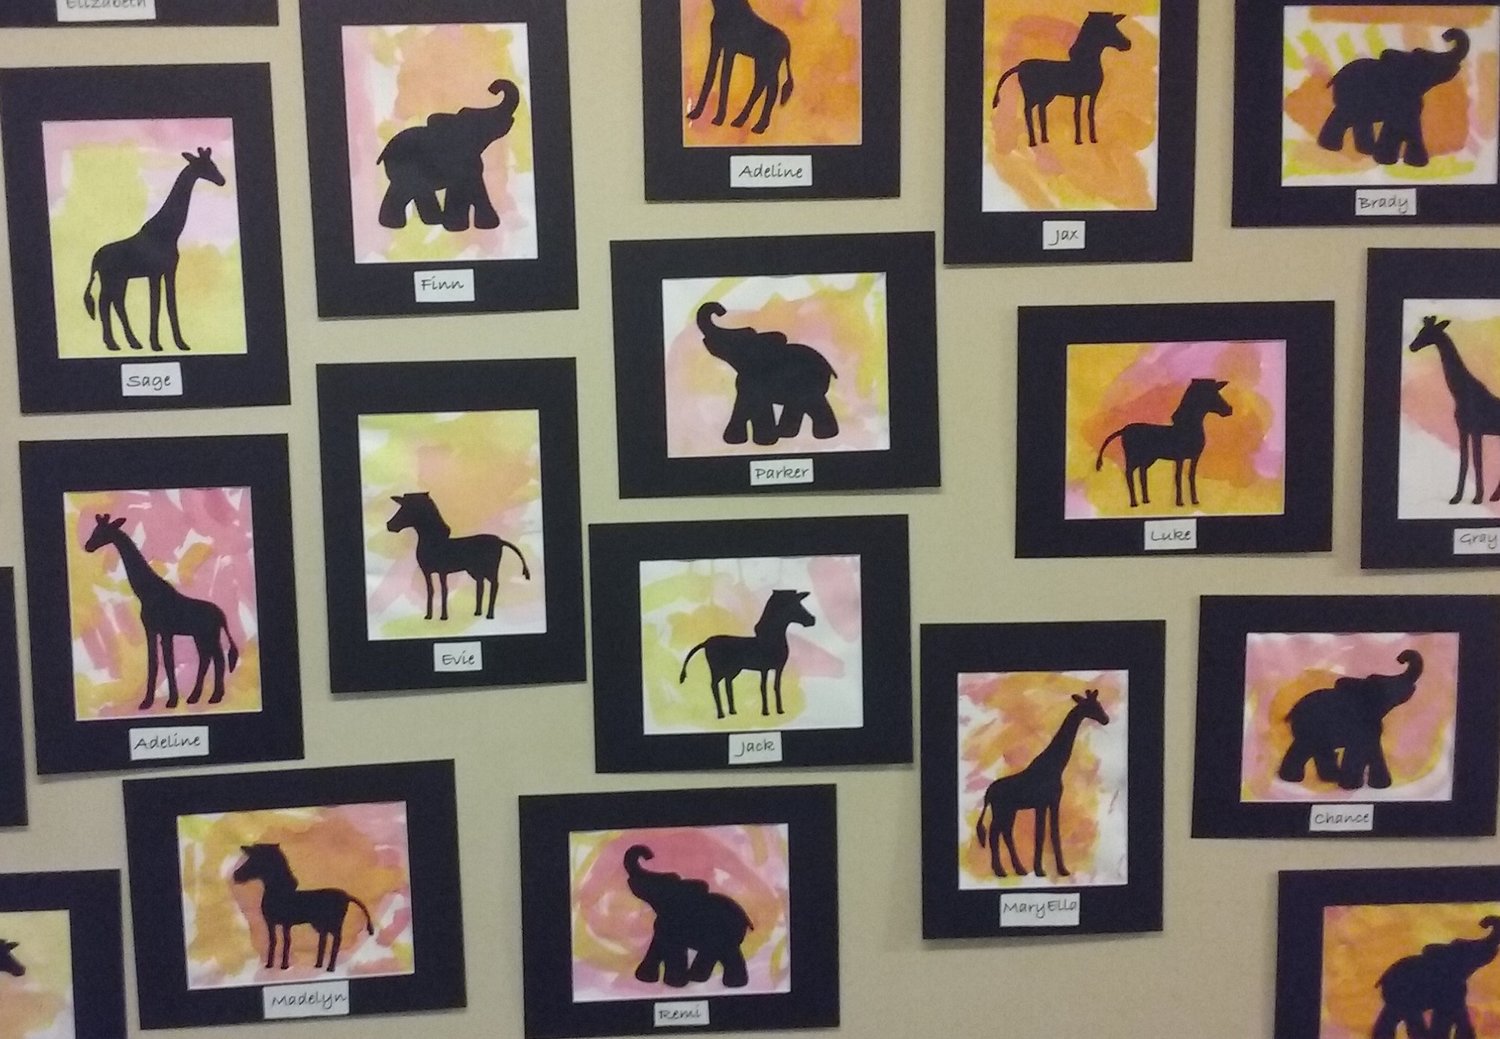 Eye-catching silhouettes occupy one wall at the Promisetown Preschool Art Show.